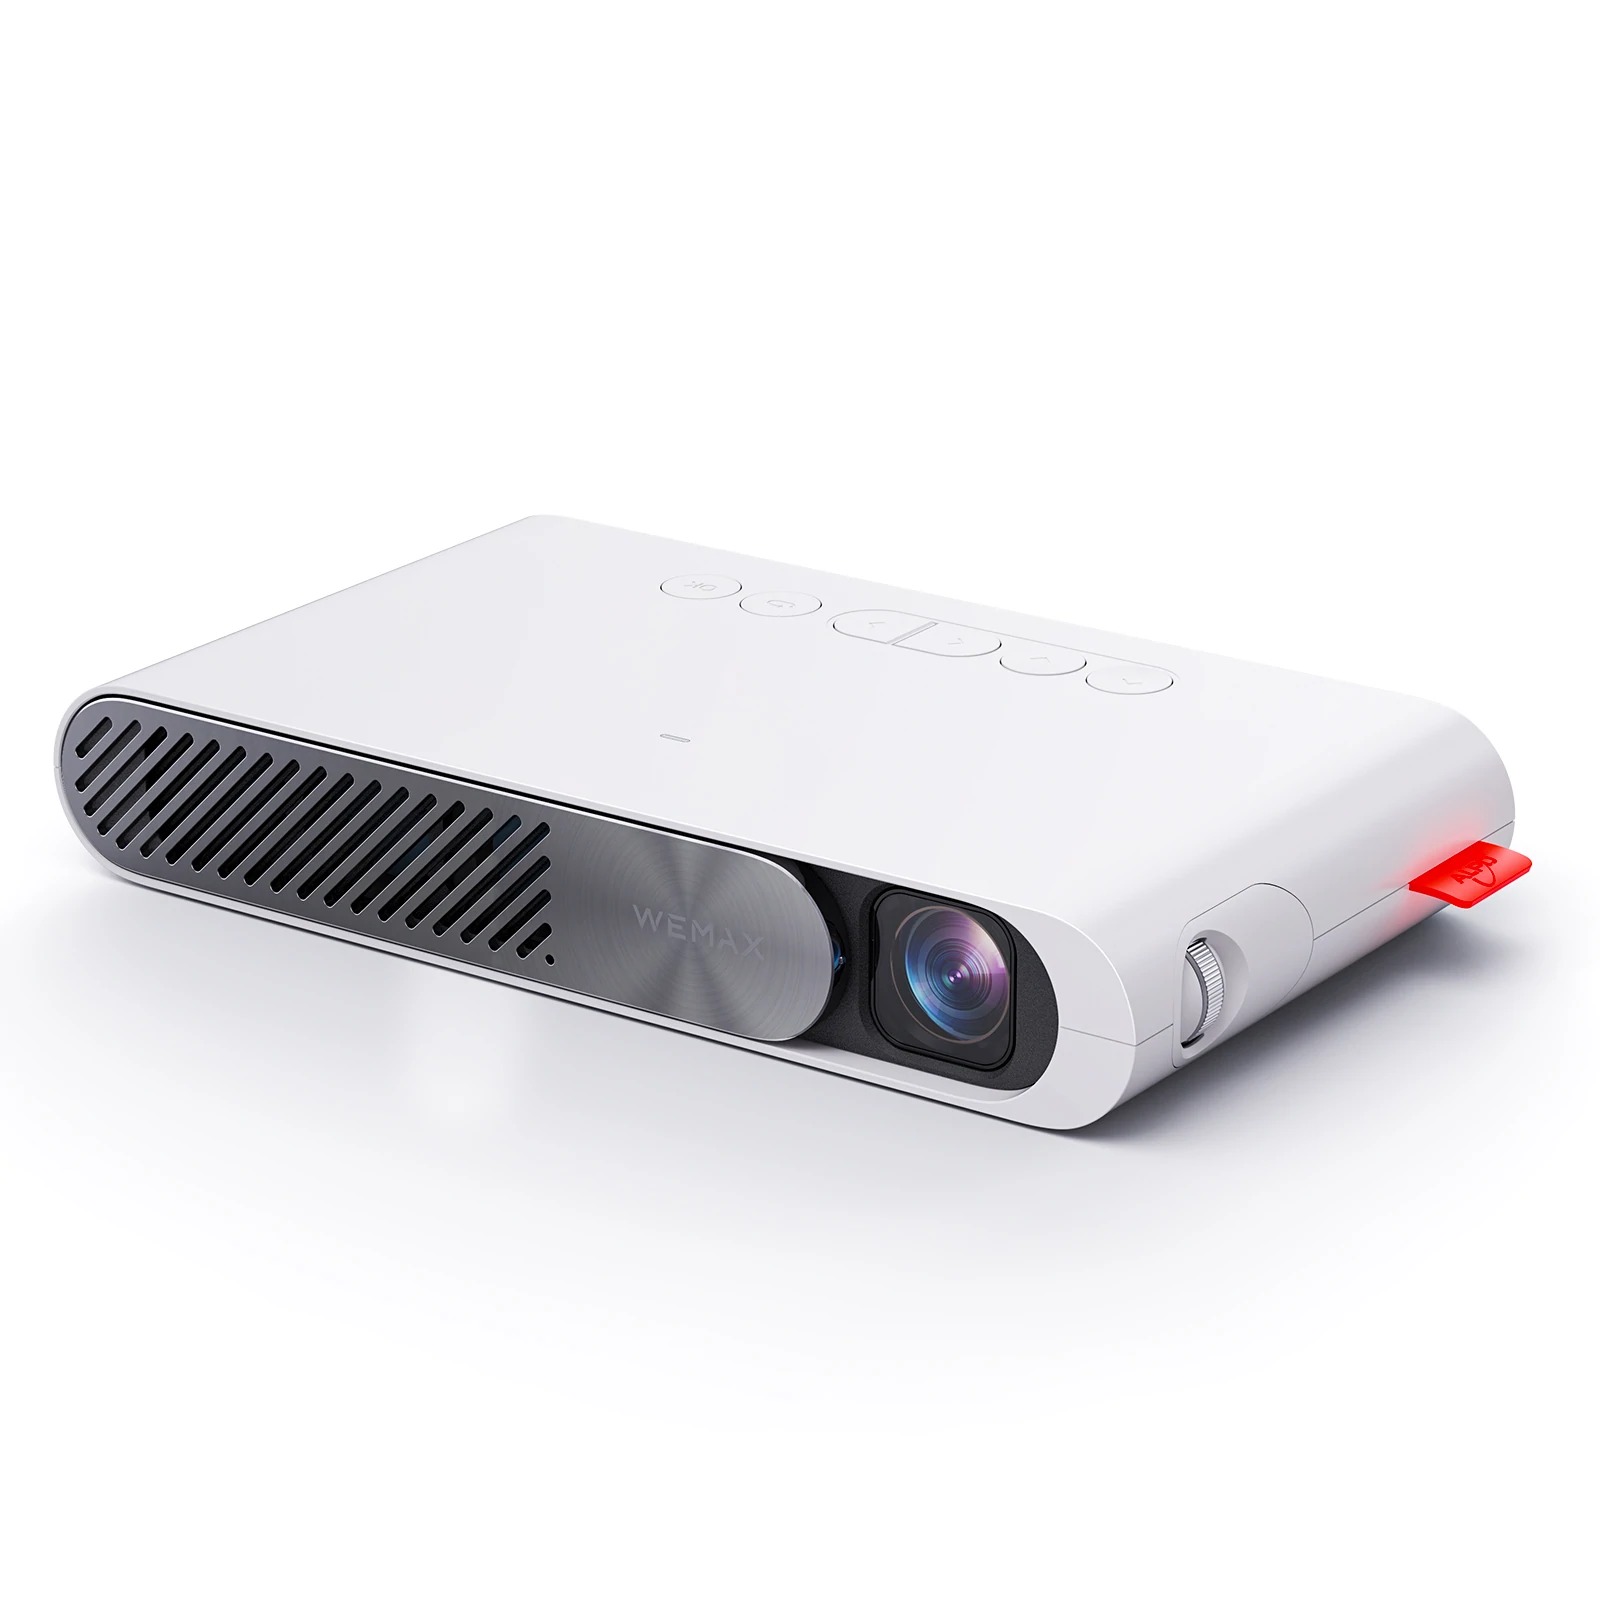 Wemax Go Ultra-portable ALPD Laser Projector 0.66lb 1-inch Thickness 1080P Supported w/Built-in WiFi Auto Keystone + Free Tripod for $289.99 + 1-Year Warranty + Free shipping